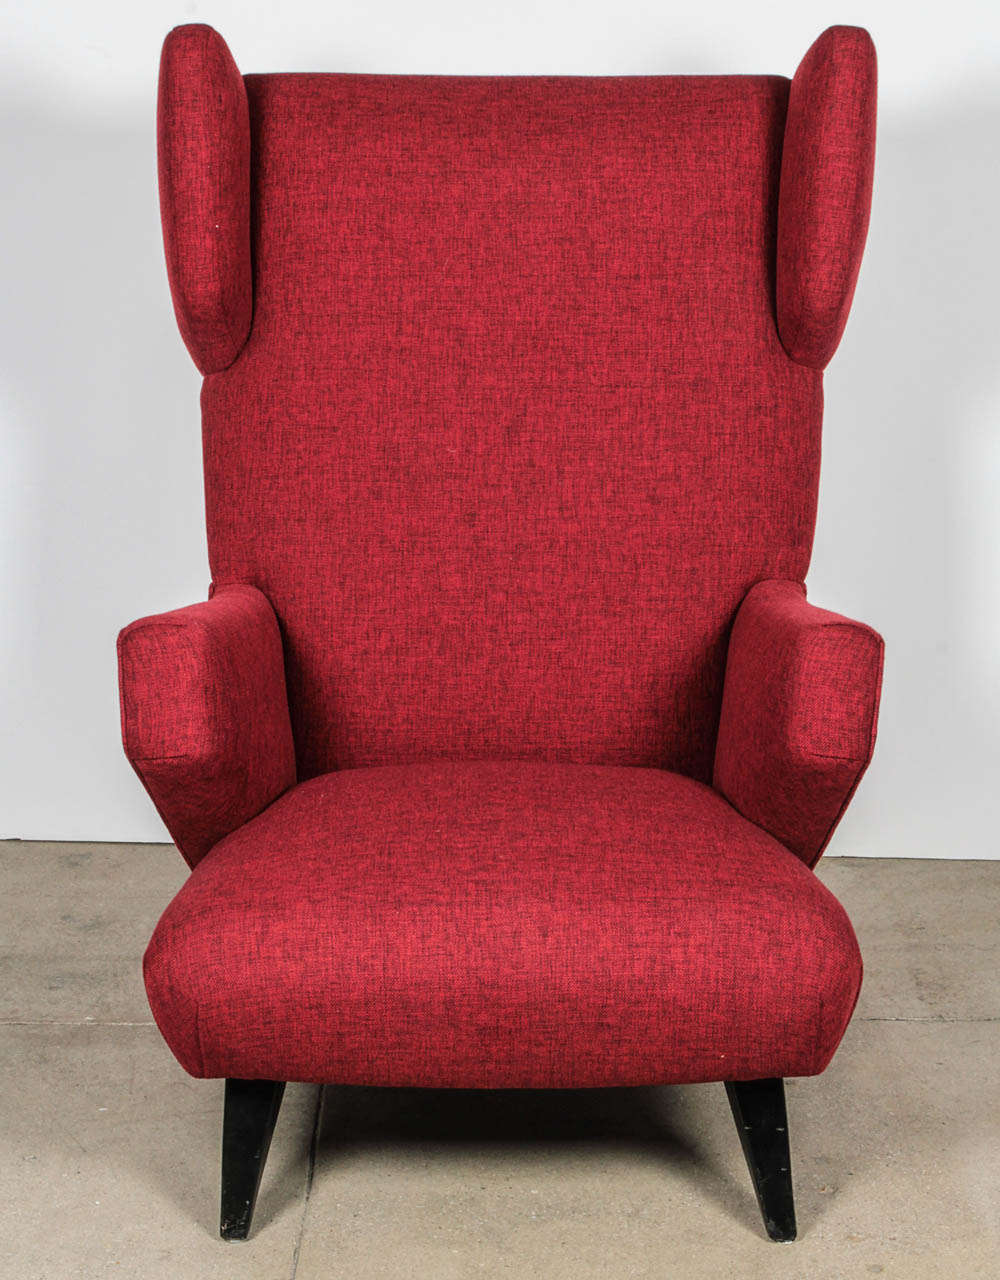 American Rare Wing Chair by Jens Risom